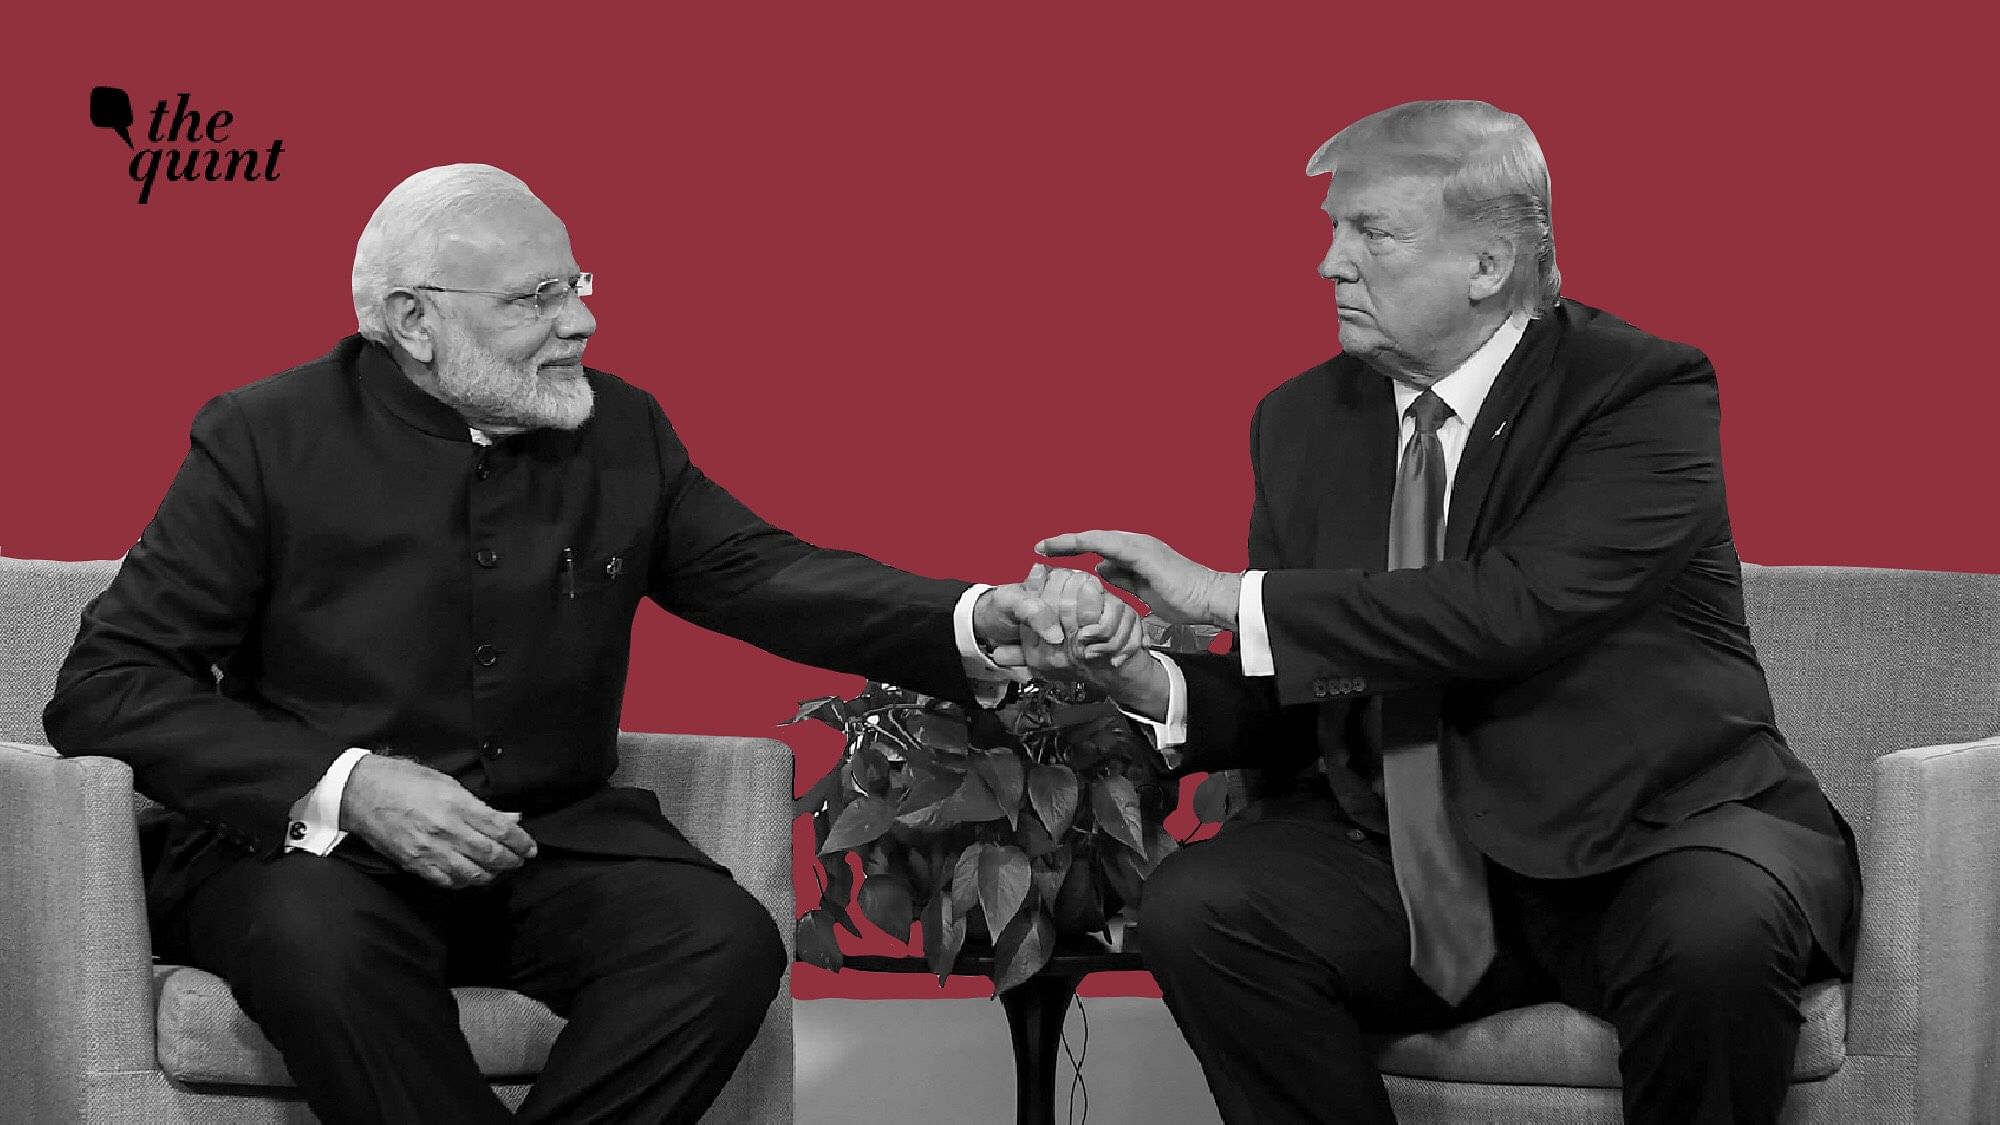 Ahead of his India visit on 24-25 February, Trump said that India has not treated his country “very well” on the trade front.